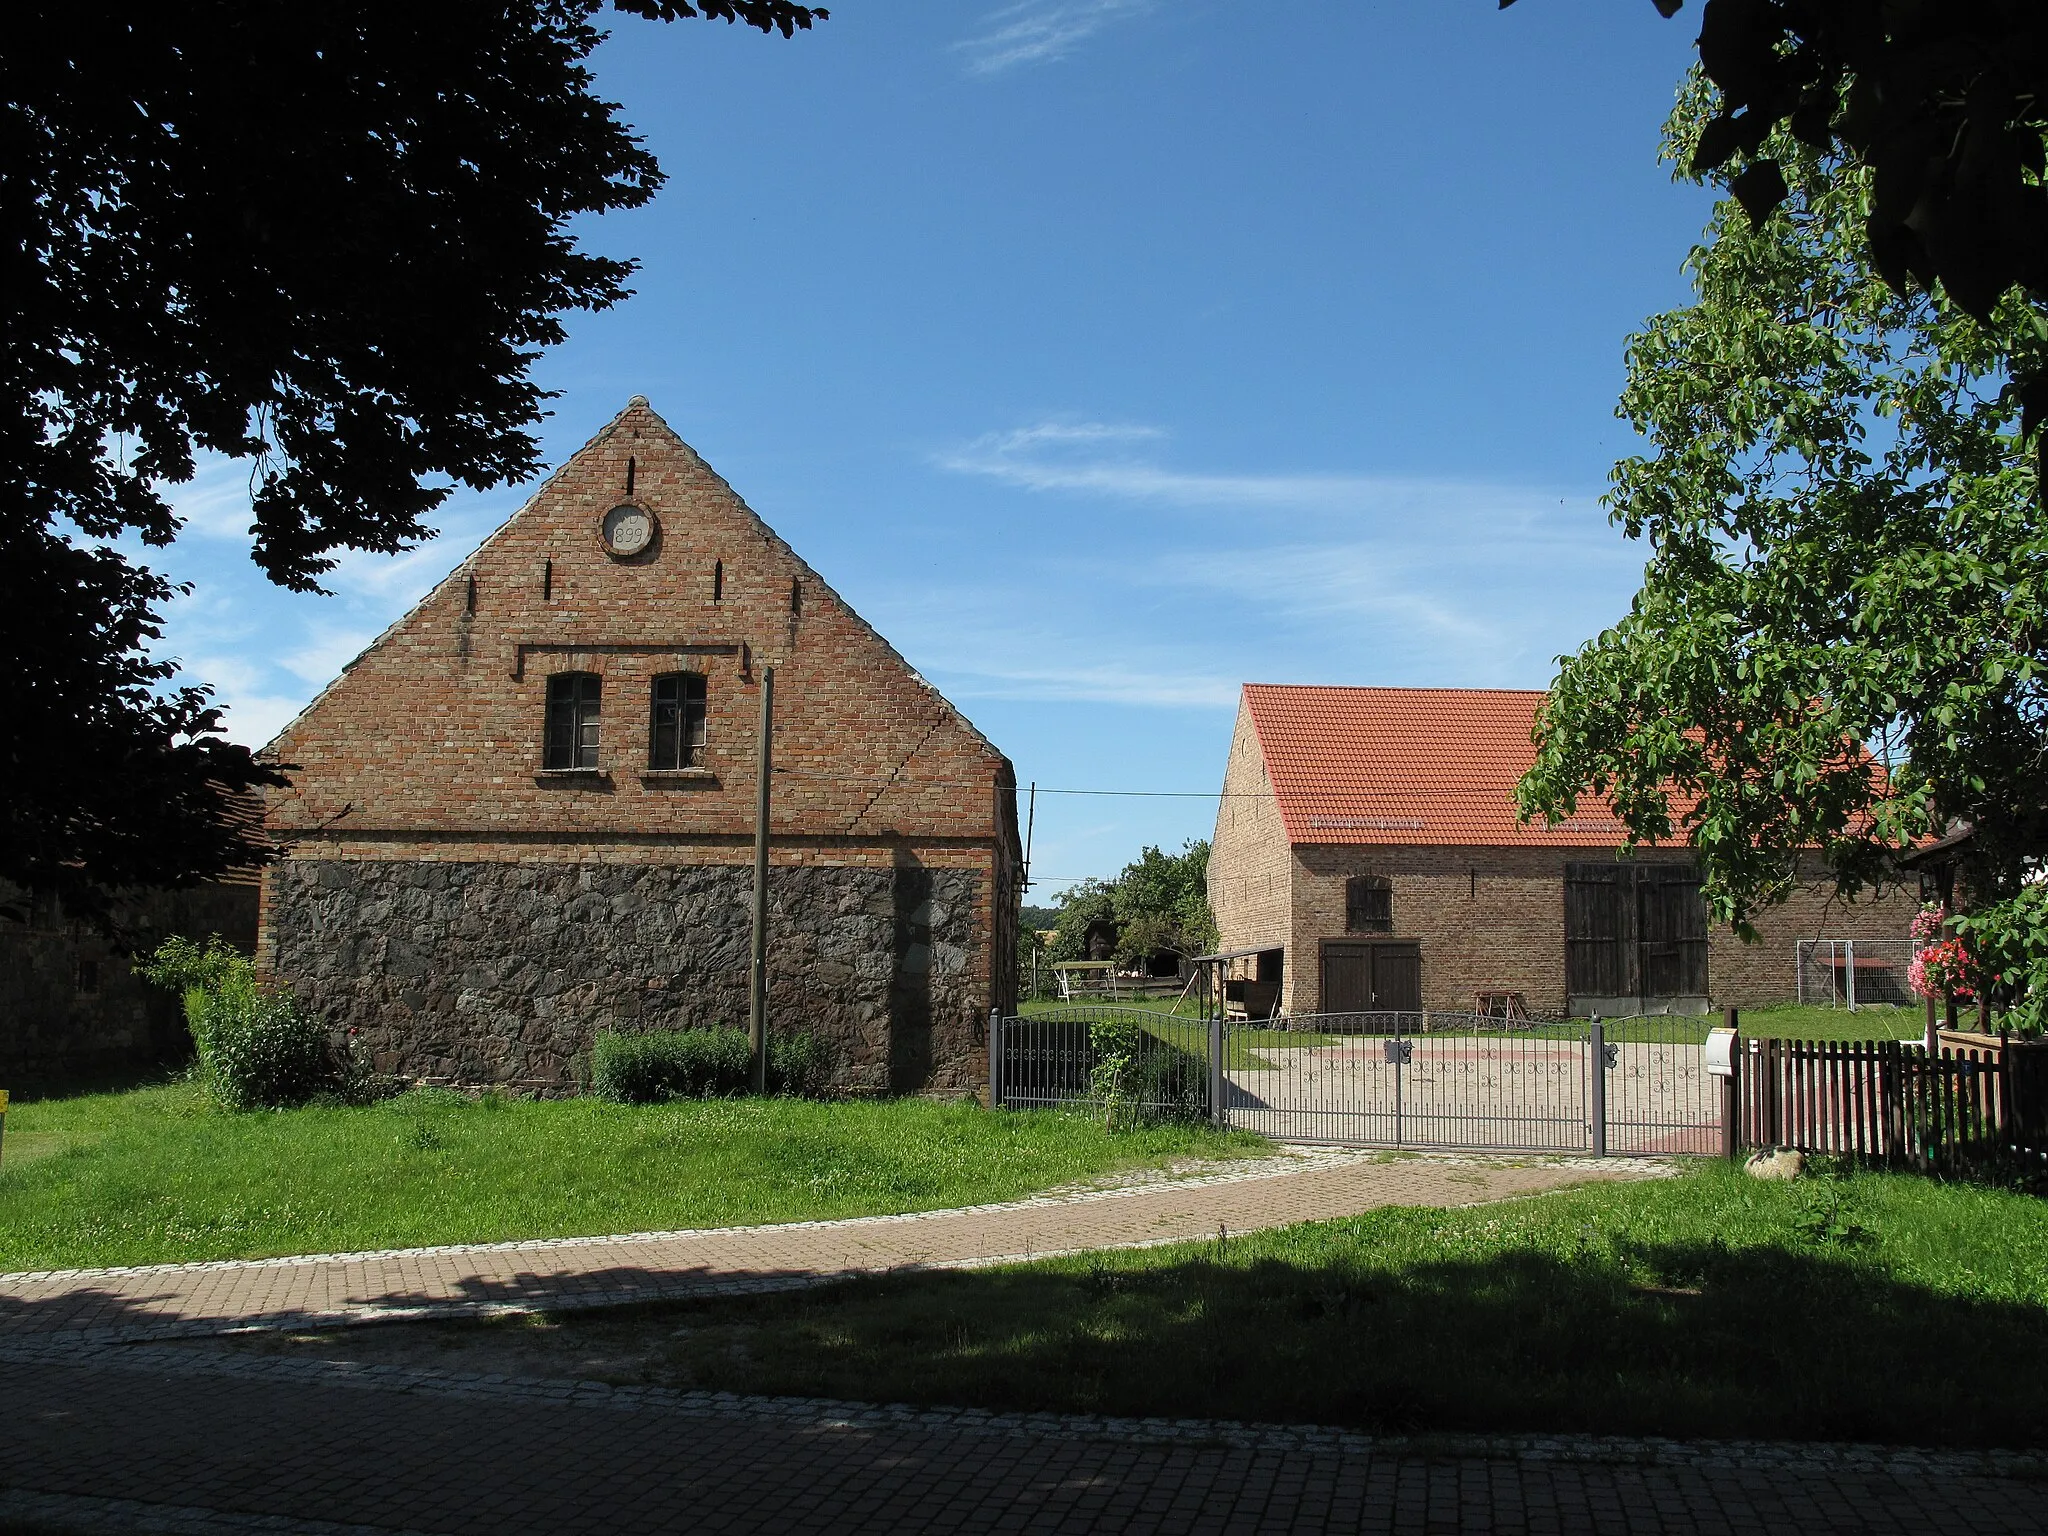 Photo showing: Pritzhagen is a village of the municipality Oberbarnim in the District Märkisch-Oderland, Brandenburg, Germany. It is situated in the Märkische Schweiz Nature Park. The village green with its pond and the perimeter fieldstone-walls was extensively renovated in 2004.